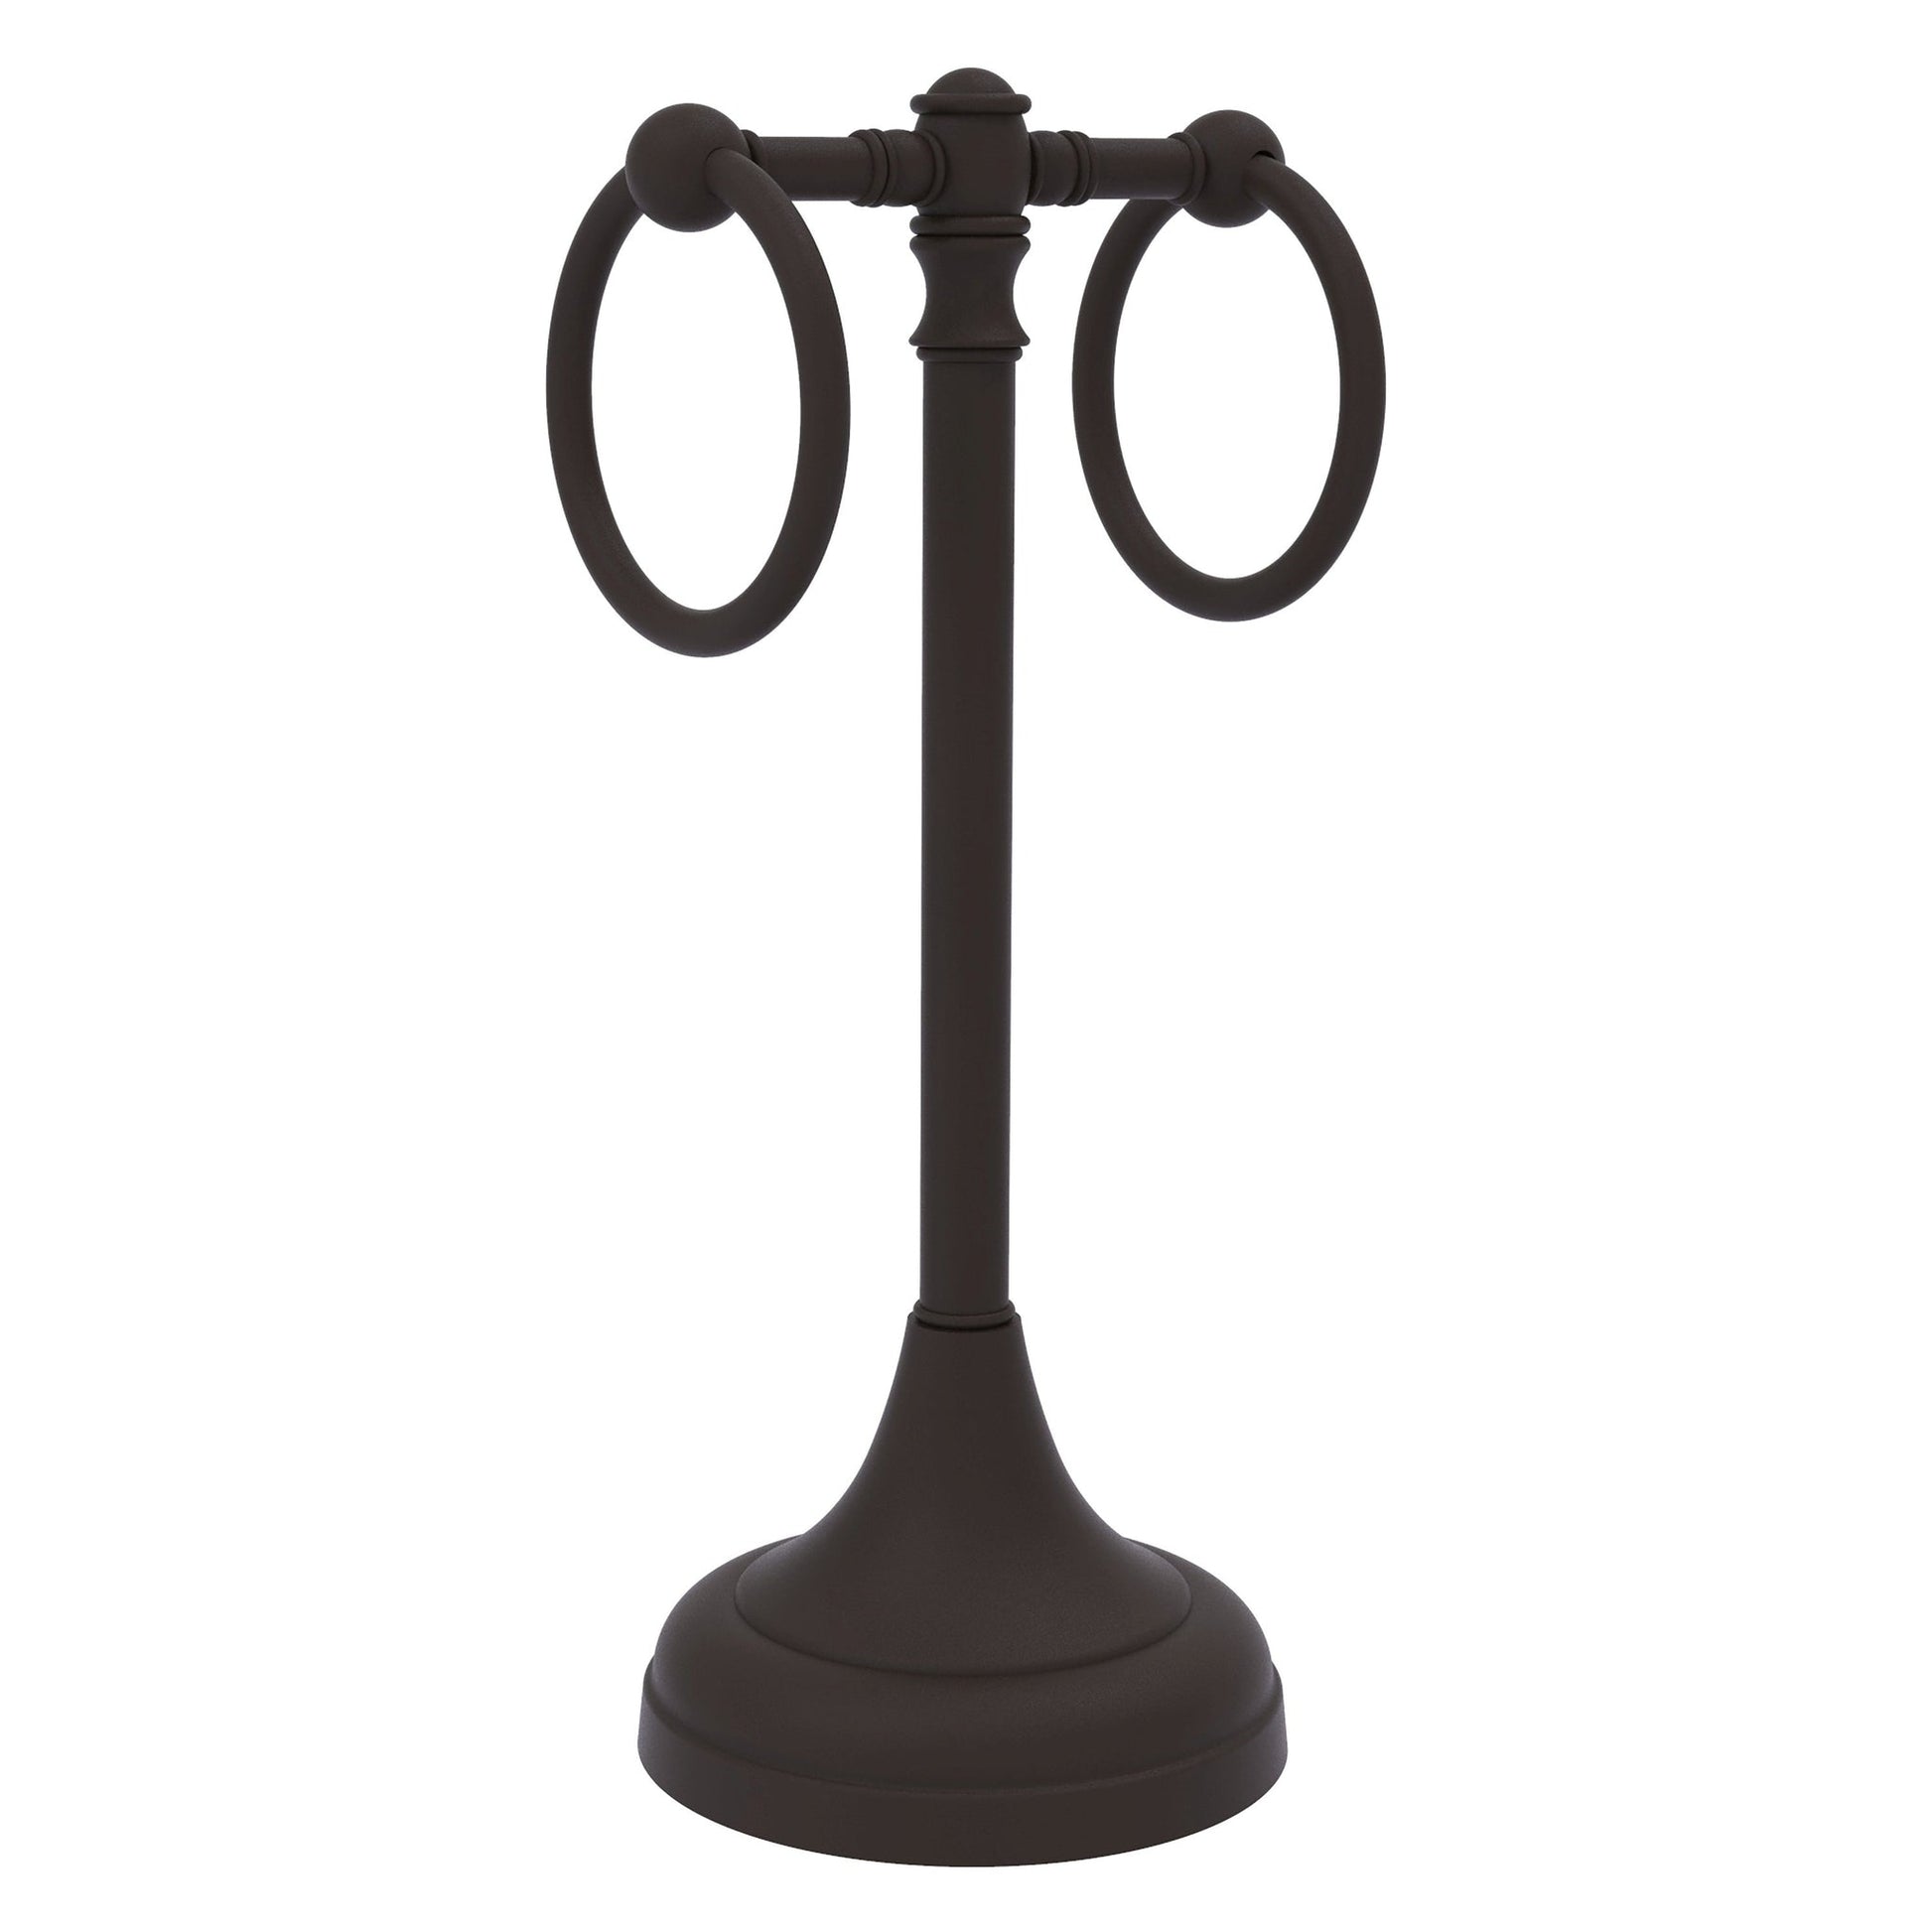 Allied Brass Carolina 5.5" x 5.5" Oil Rubbed Bronze Solid Brass 2-Ring Guest Towel Stand